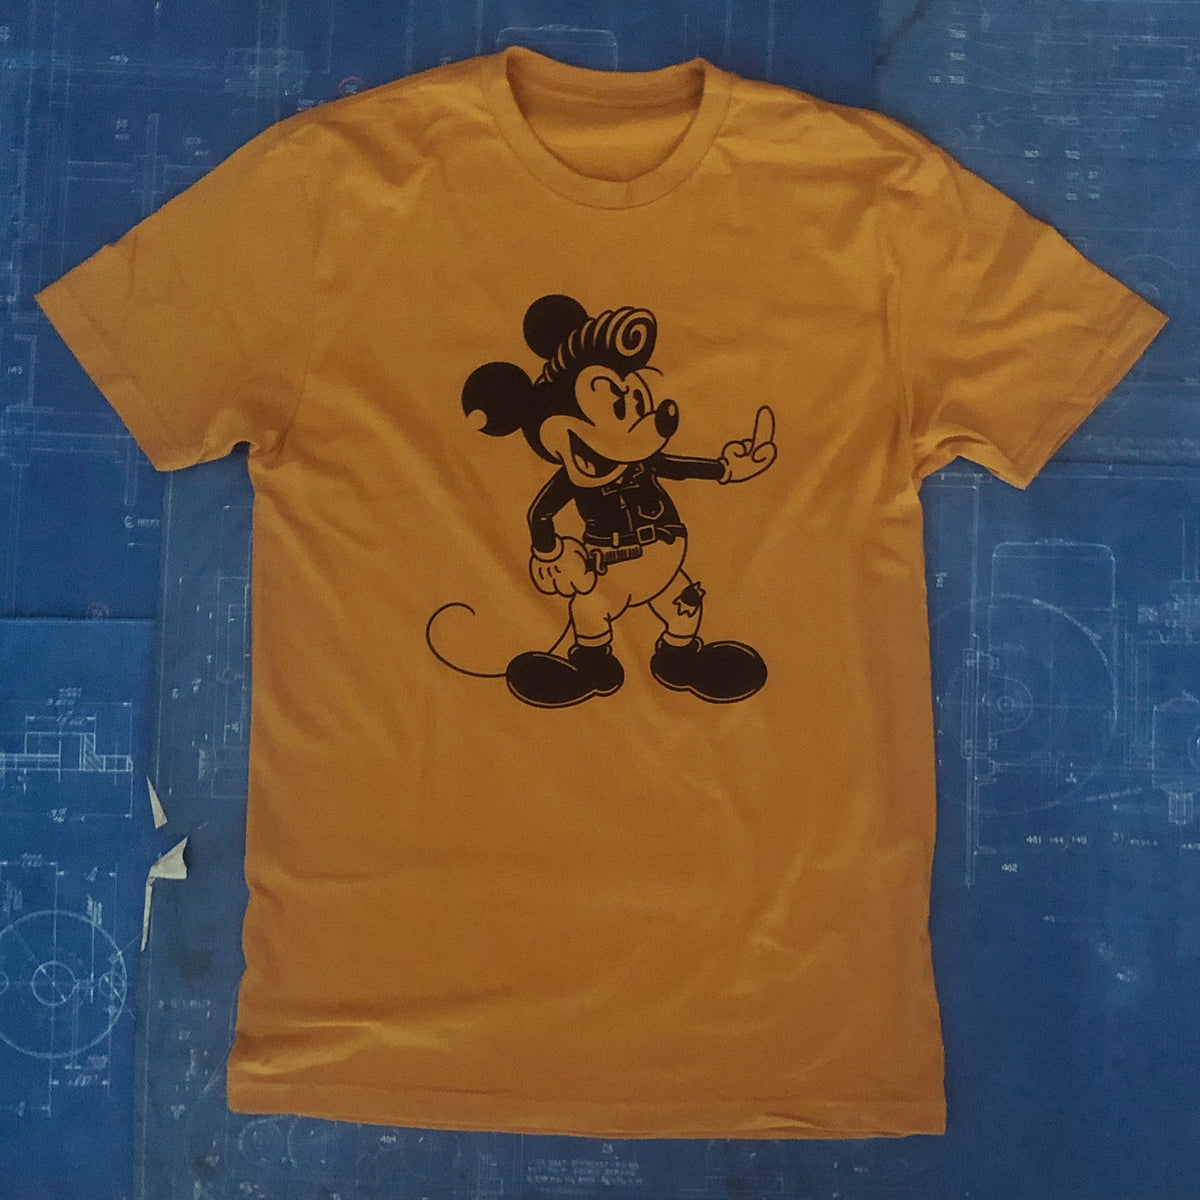 A "GREASER MICK" TSY TEE T-SHIRT, OLD GOLD